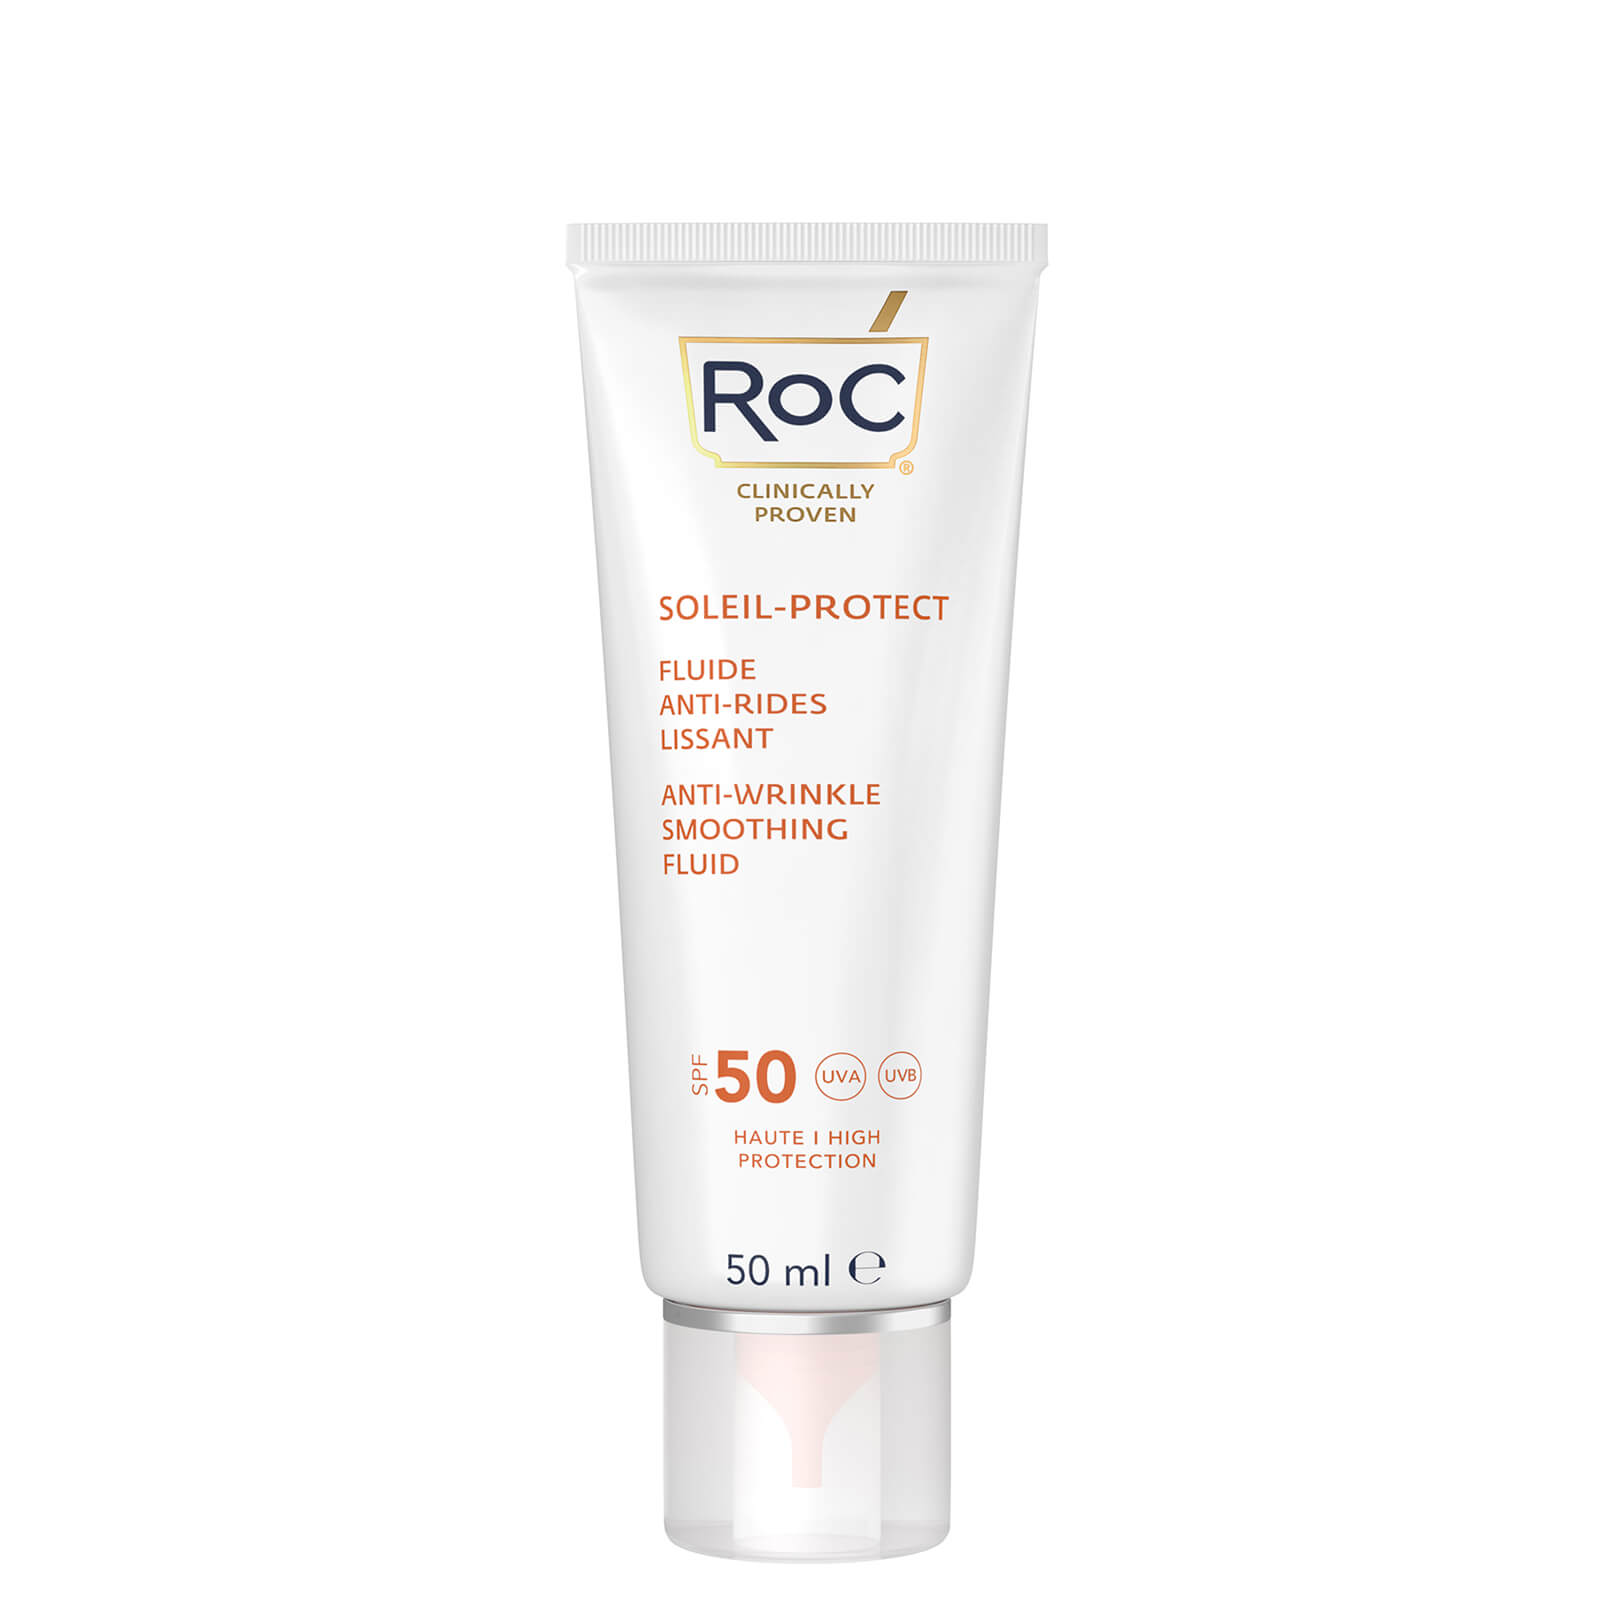 RoC Soleil-Protect Anti-Wrinkle Smoothing Fluid SPF50 50 ml